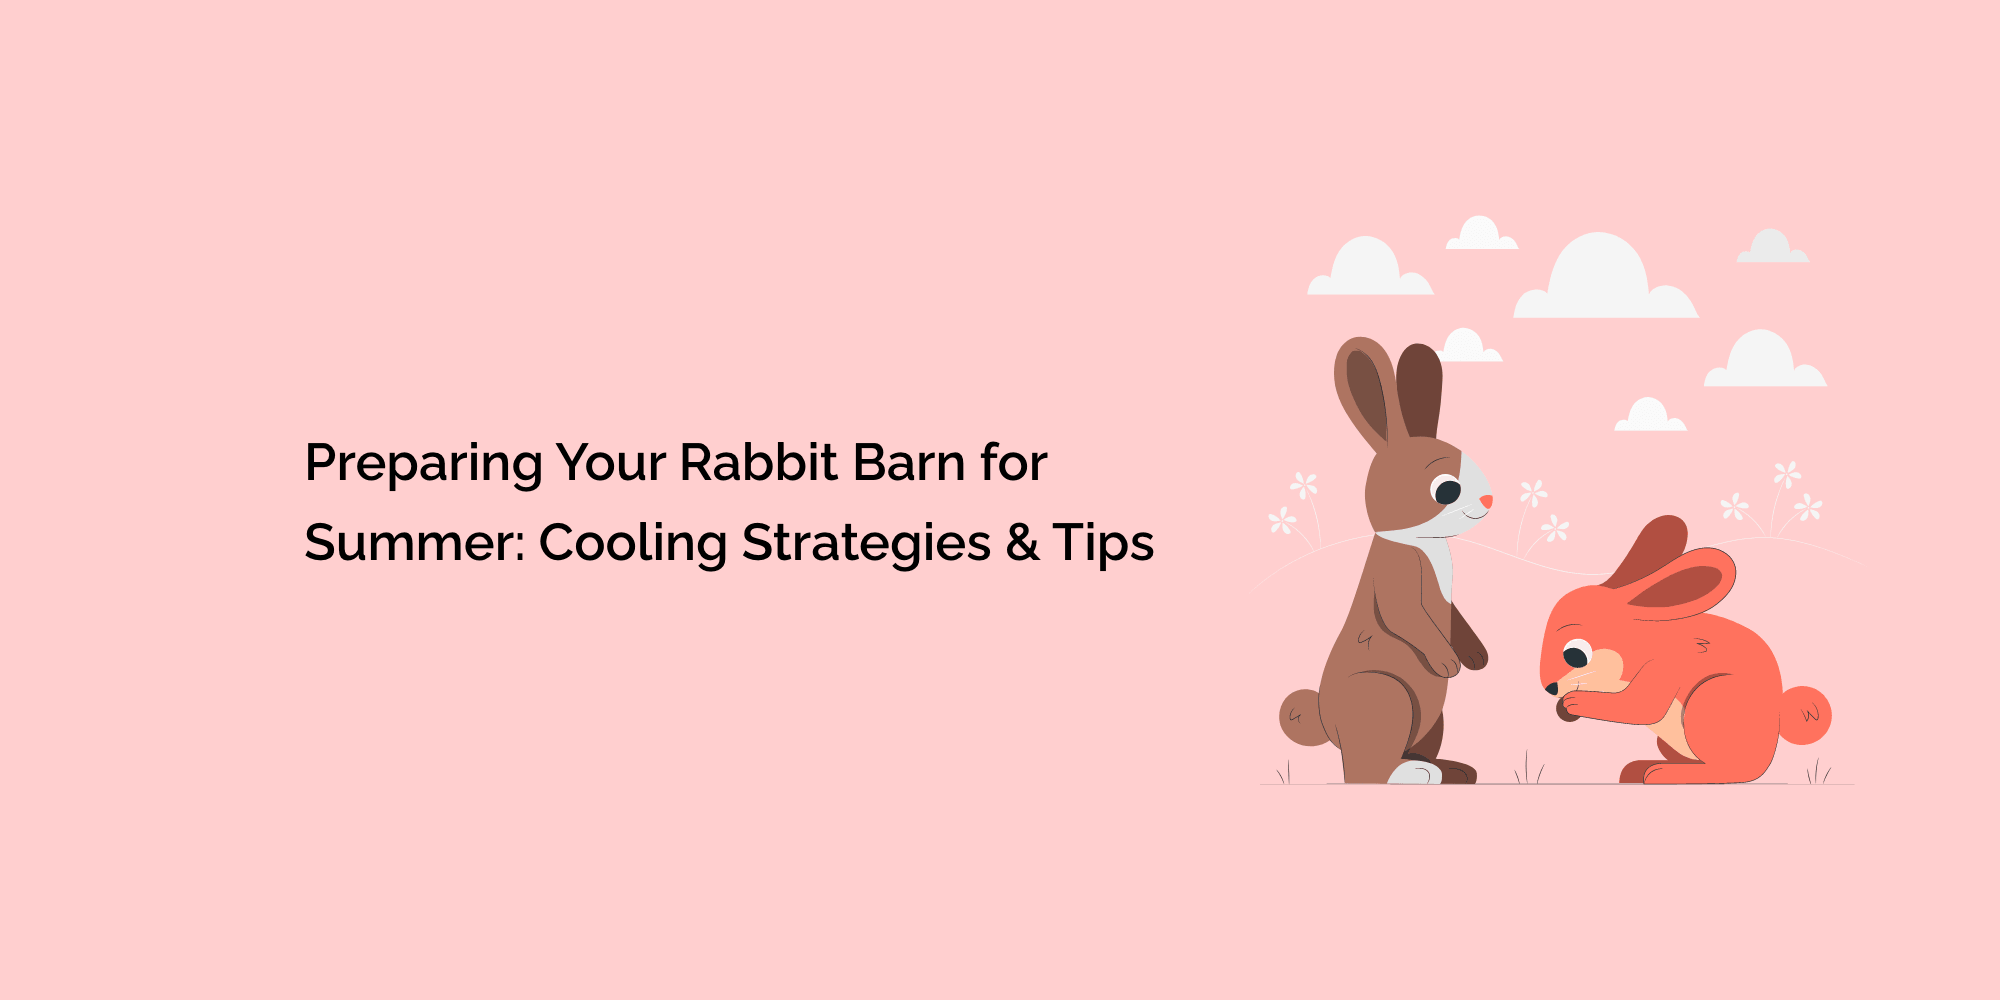 Preparing Your Rabbit Barn for Summer: Cooling Strategies and Tips